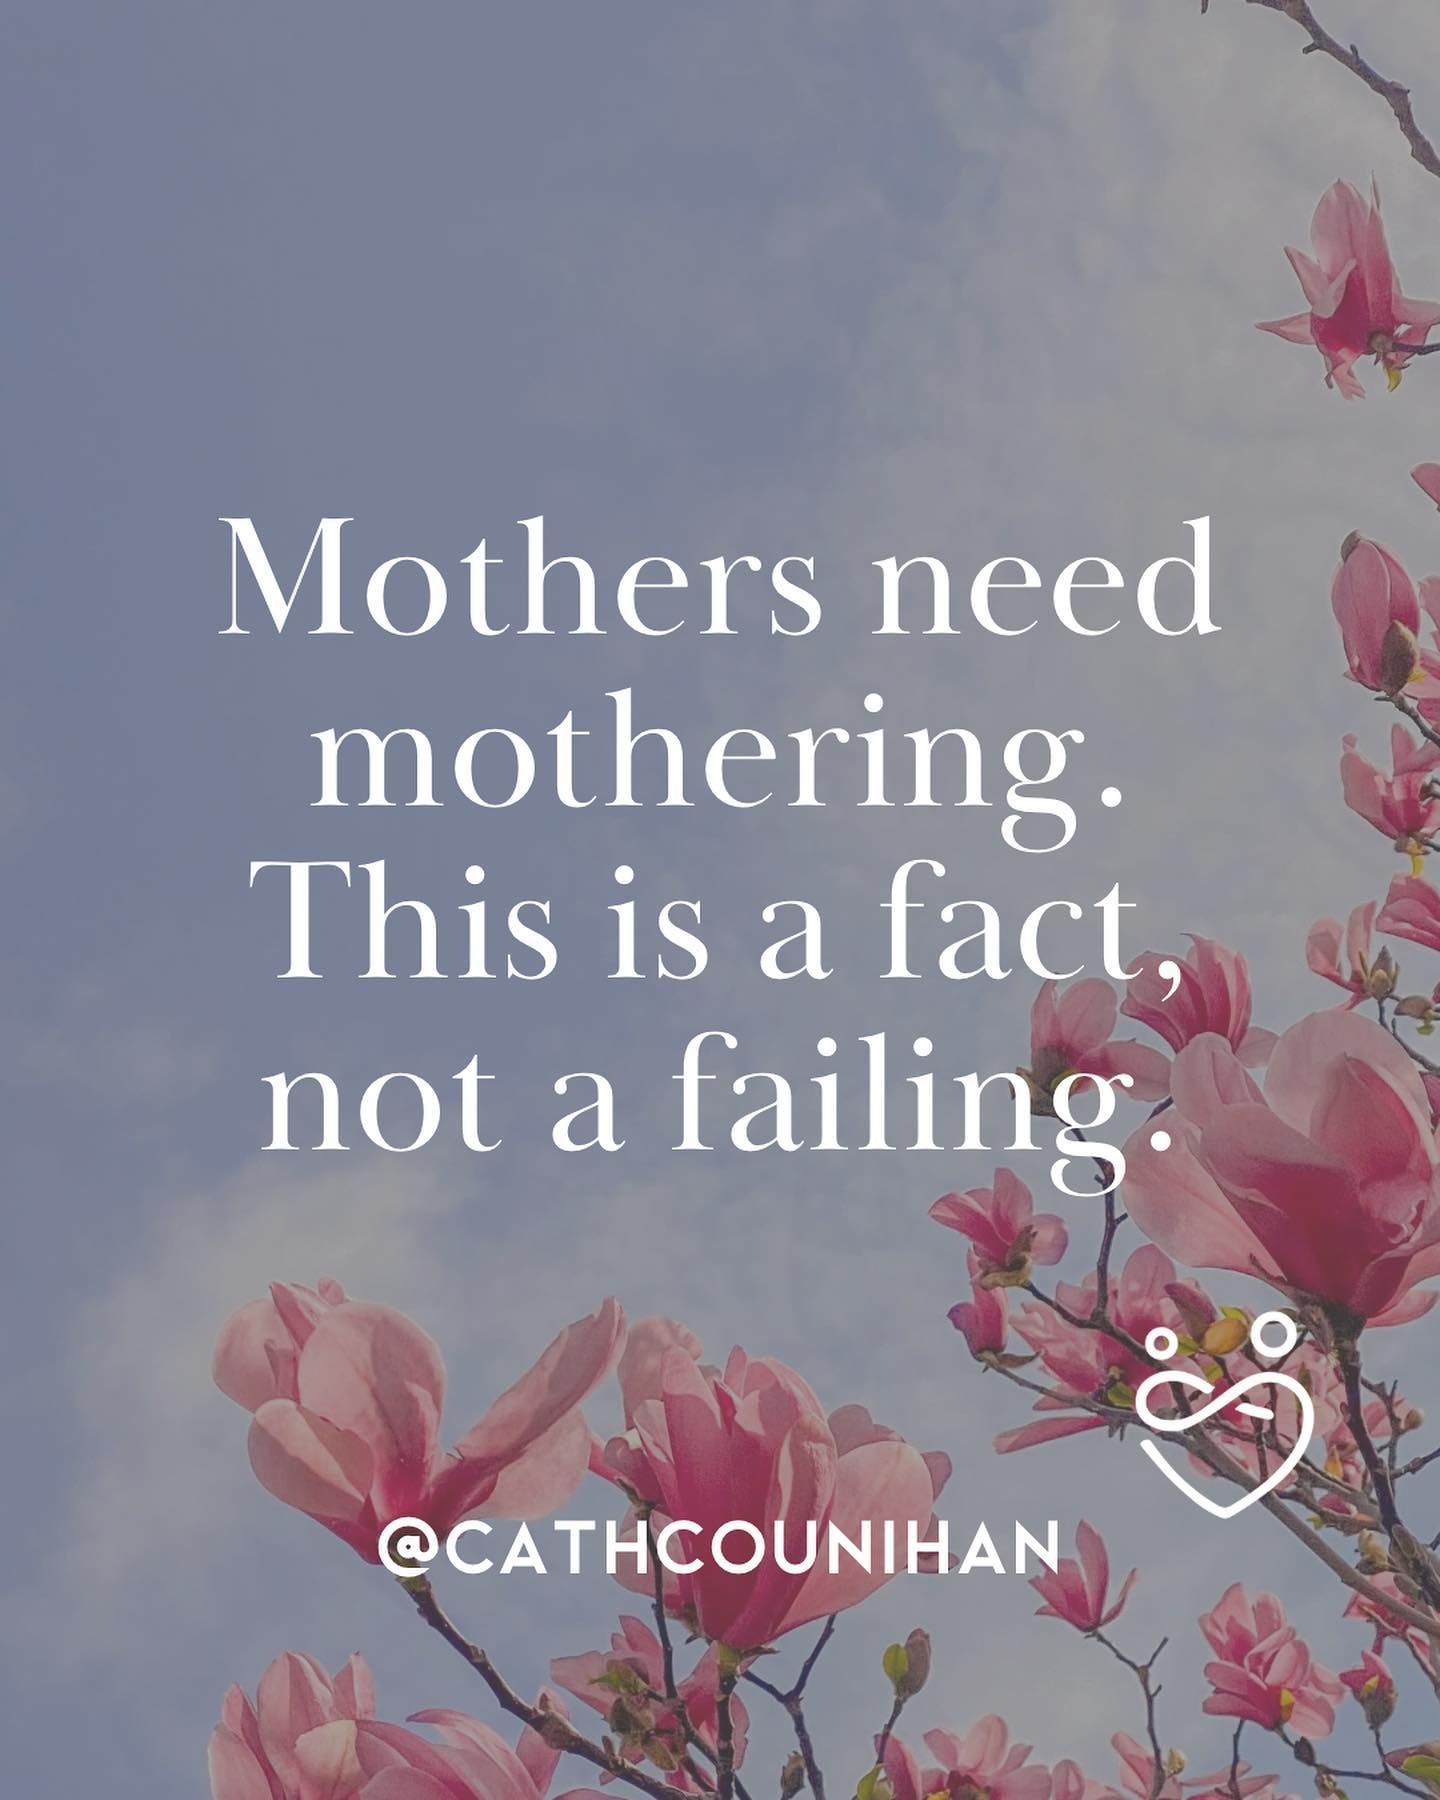 Mothers need mothering. This is a fact. It is not a personal failing.

At the same time as the baby is born the mother is born and we also need to be nurtured, held, surrounded in a bubble of care. We are learning and we need teachers, guides, encour